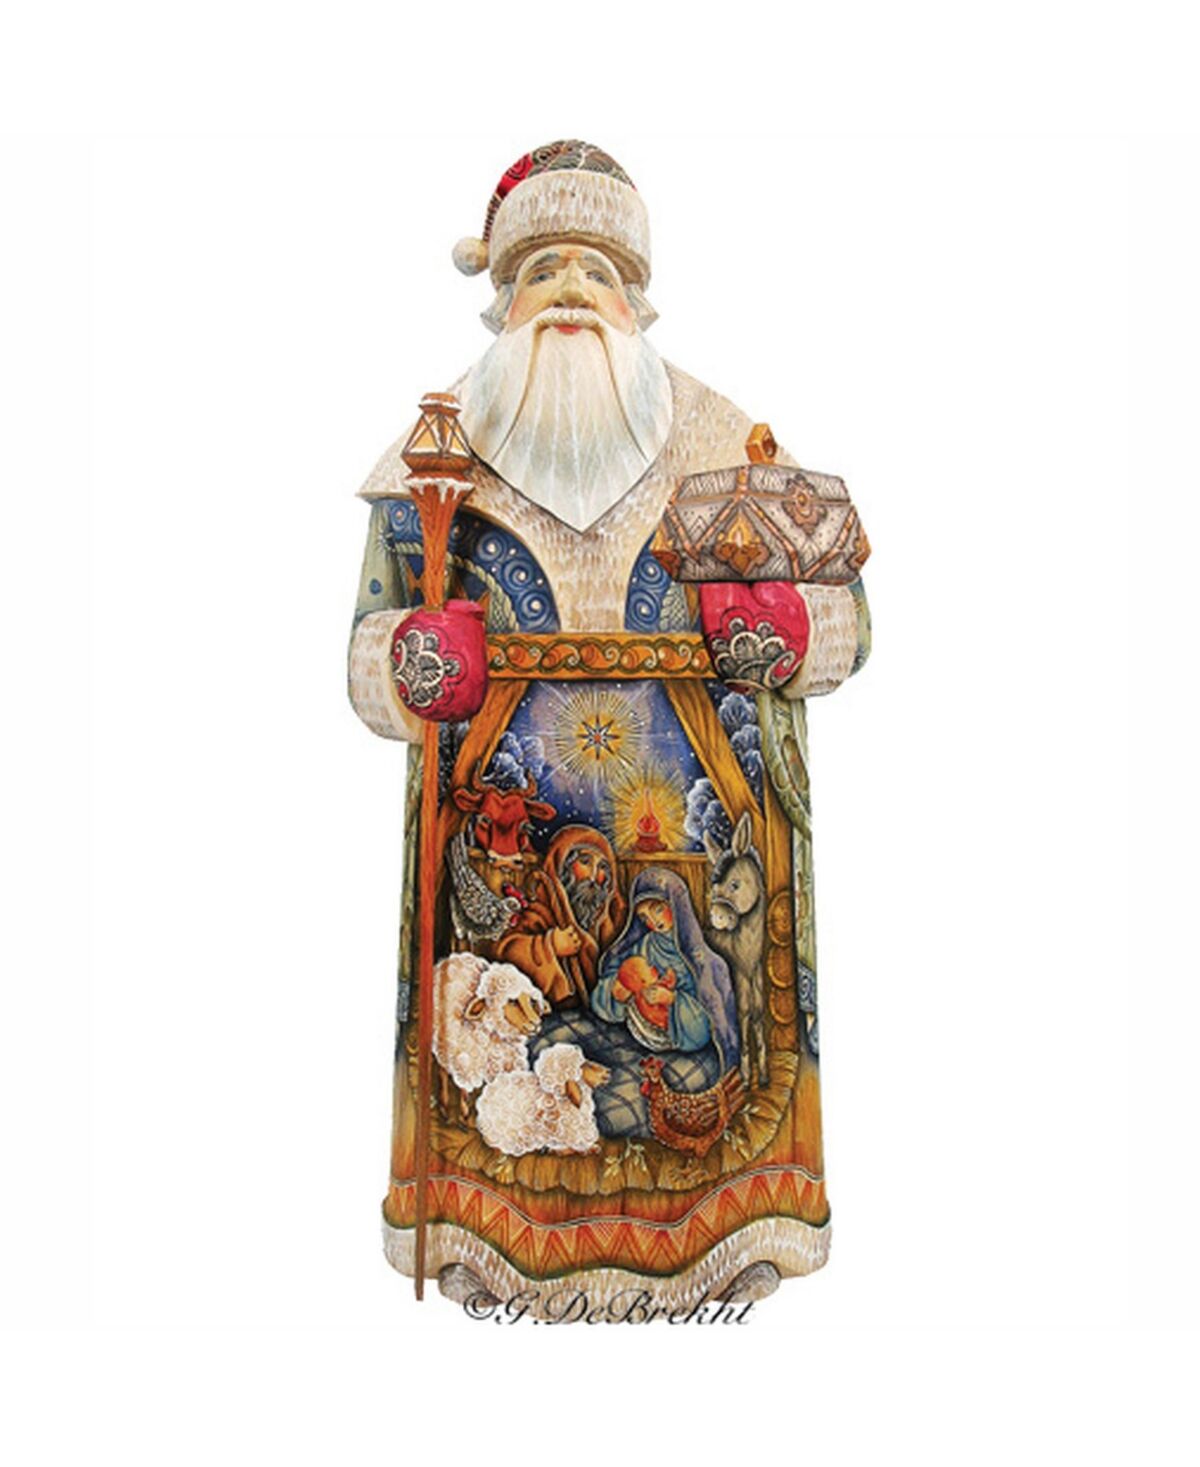 G.DeBrekht Woodcarved and Hand Painted Nativity Hand Painted Santa Claus Figurine - Multi